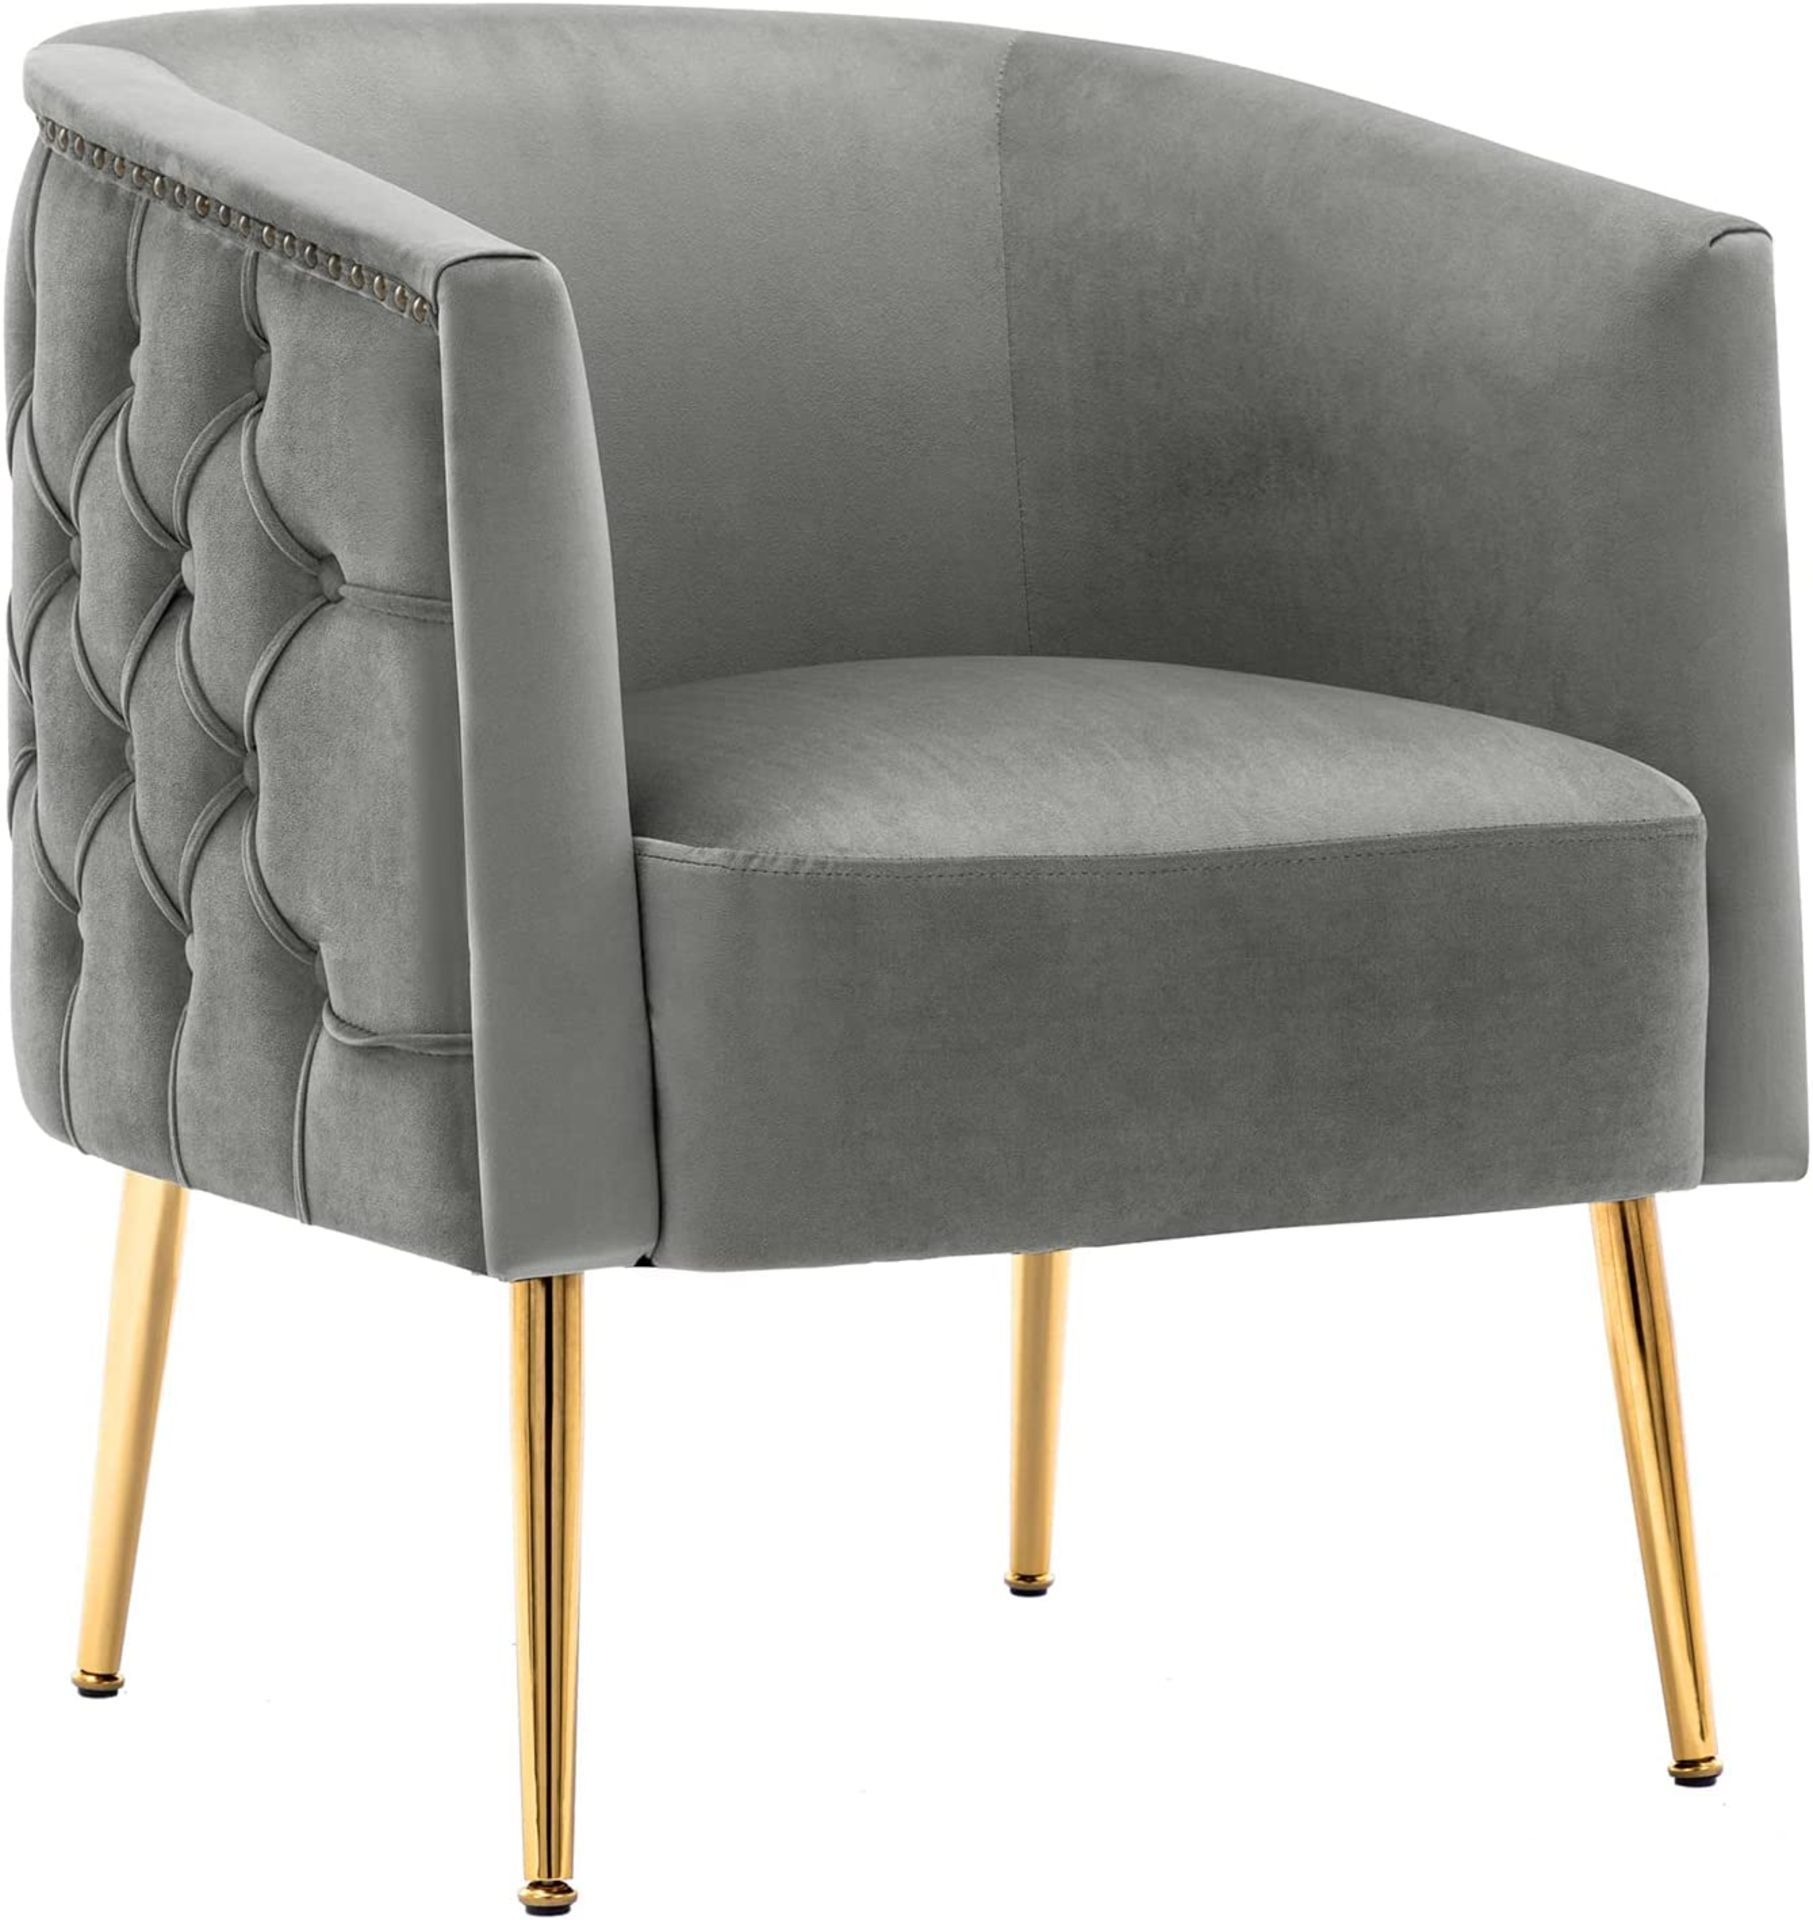 NEW Oryxearth Velvet Barrel Chair Modern Accent Chair with Golden Metal Legs Upholstered Tufted